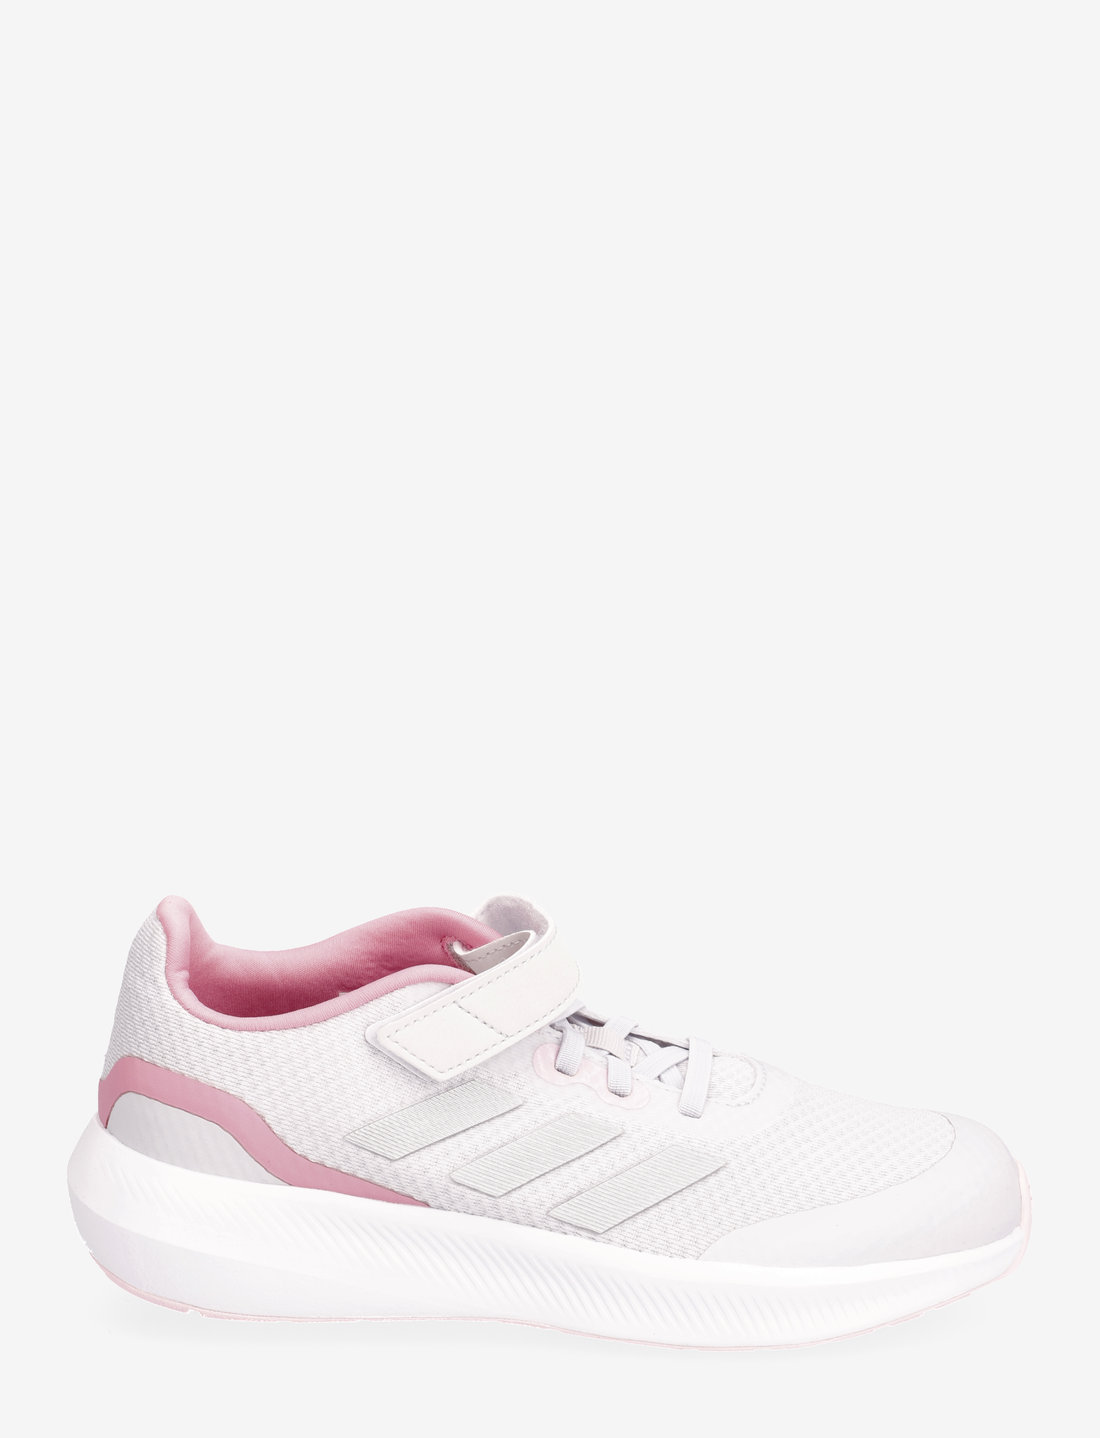 adidas Sportswear Runfalcon 3.0 Elastic Lace Top Strap Shoes - Sneakers